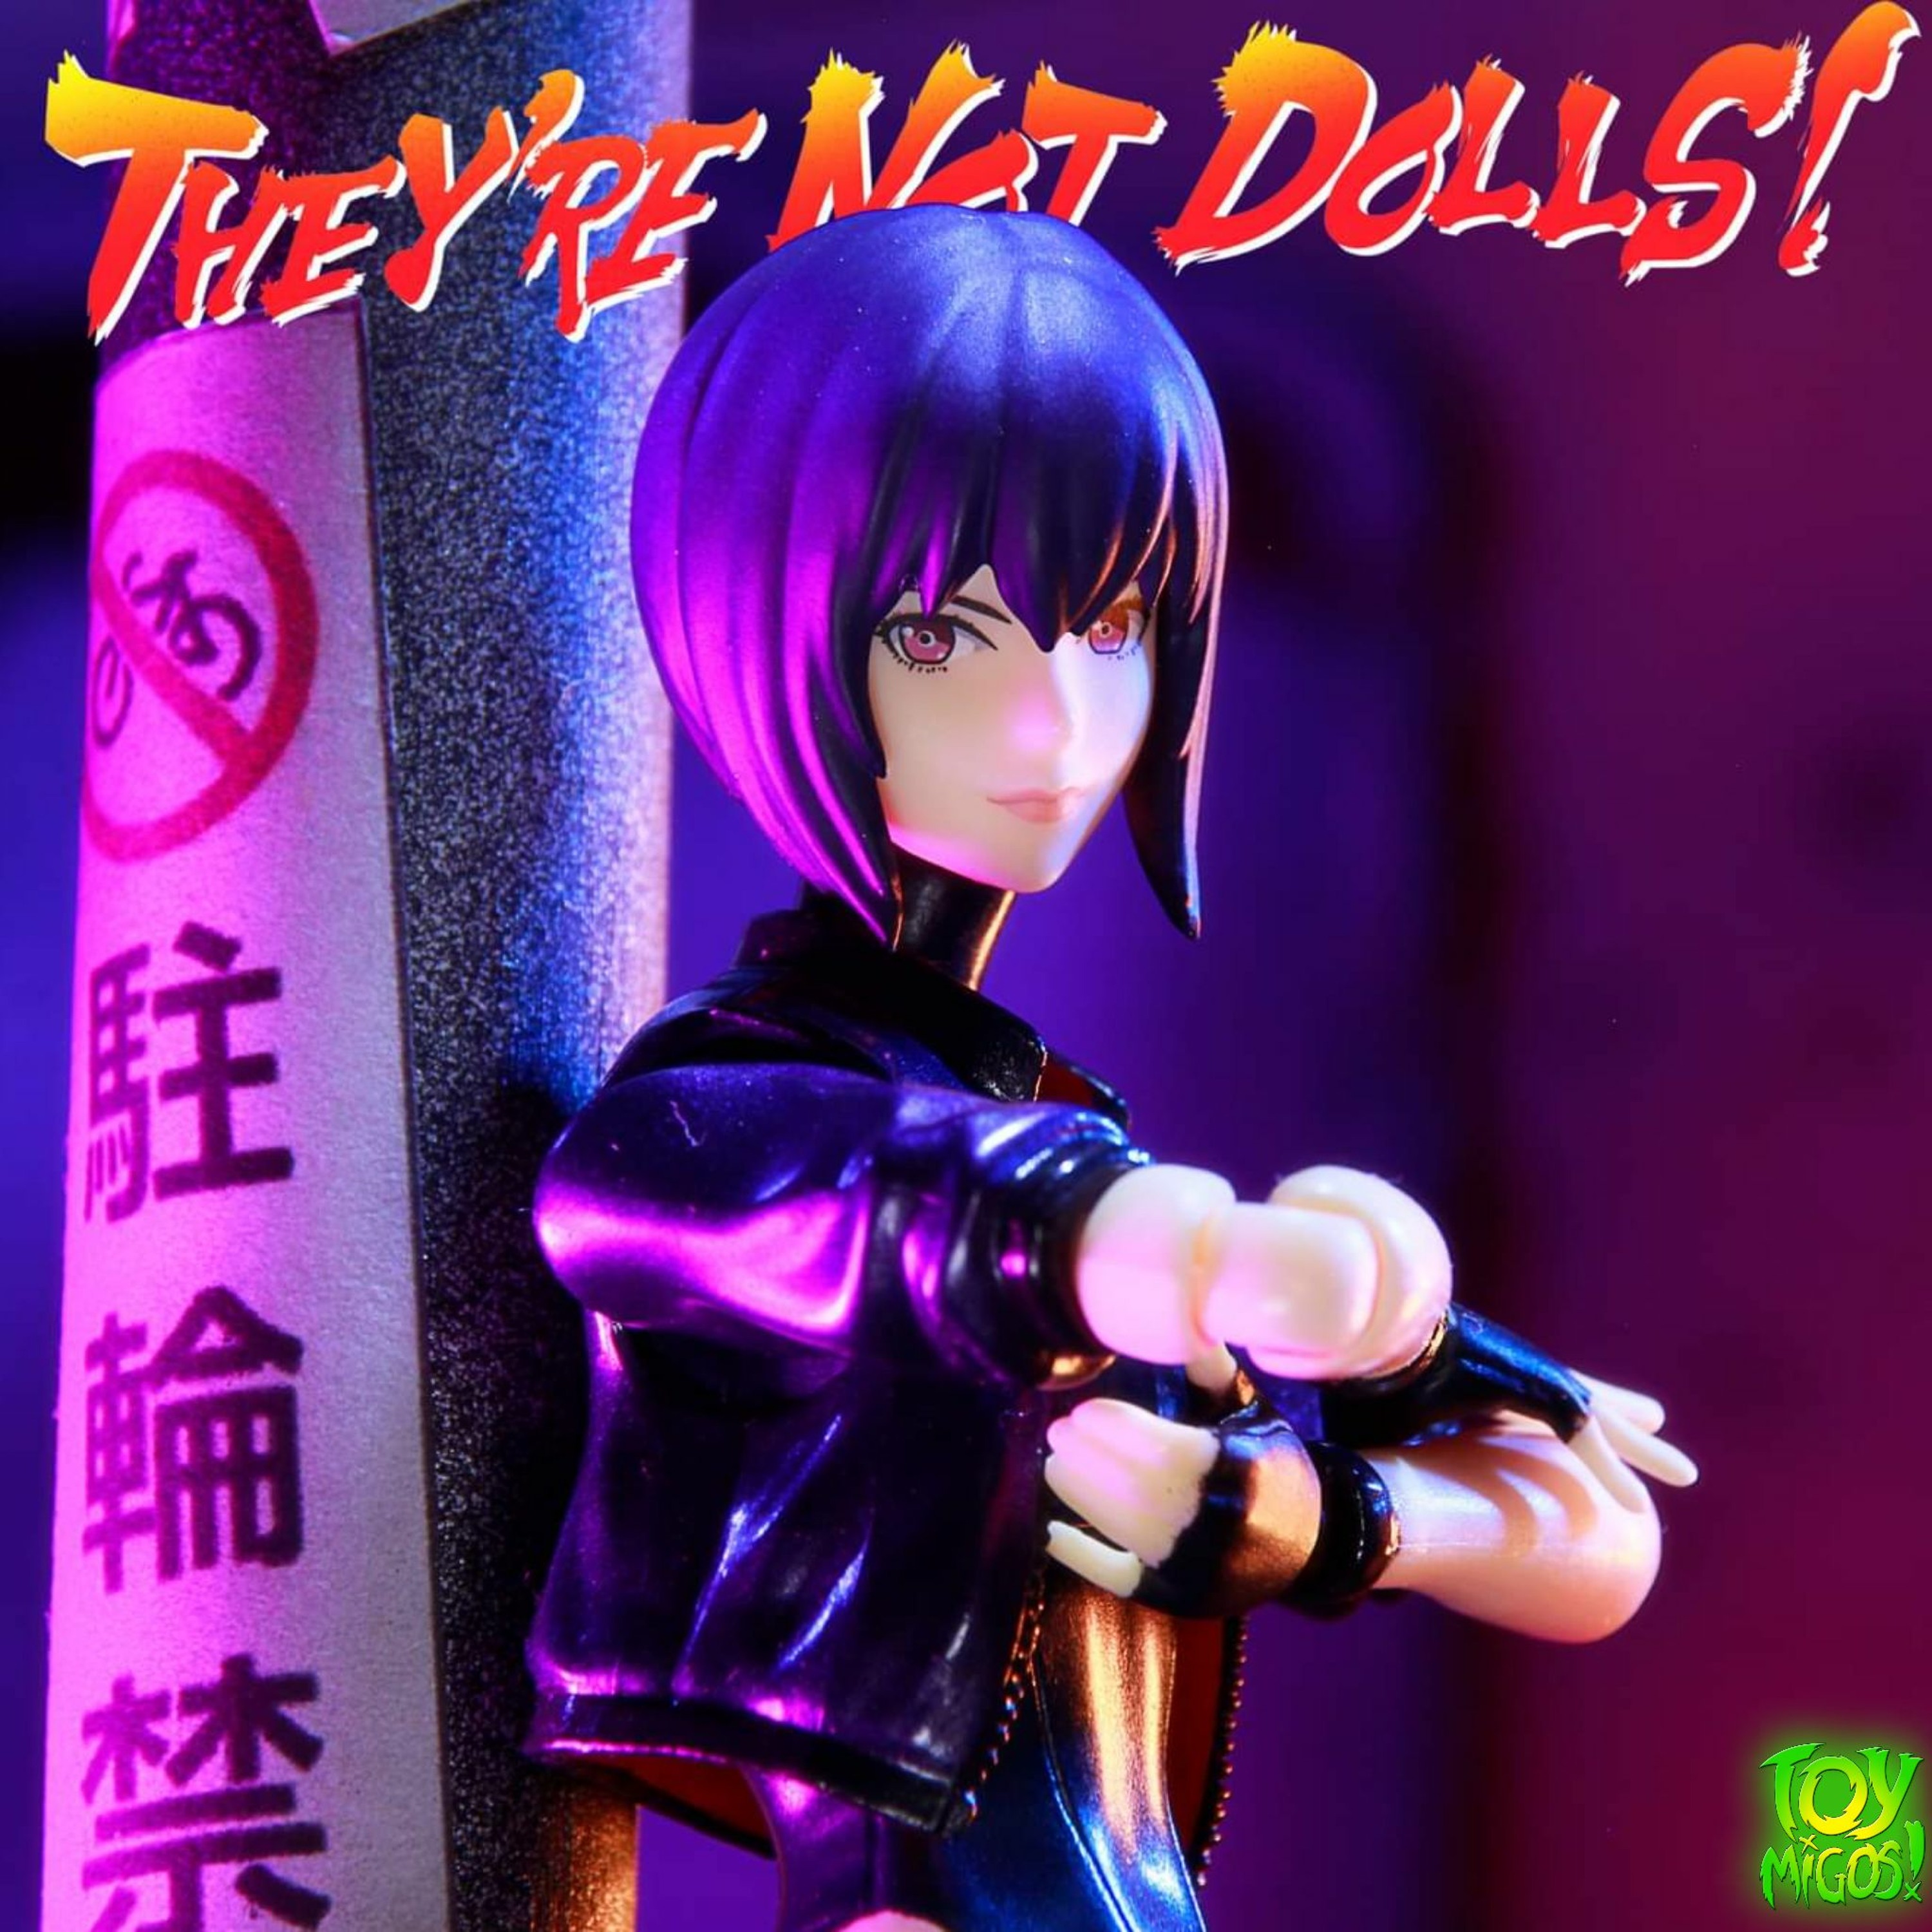 ”They’re not dolls!” Episode 291